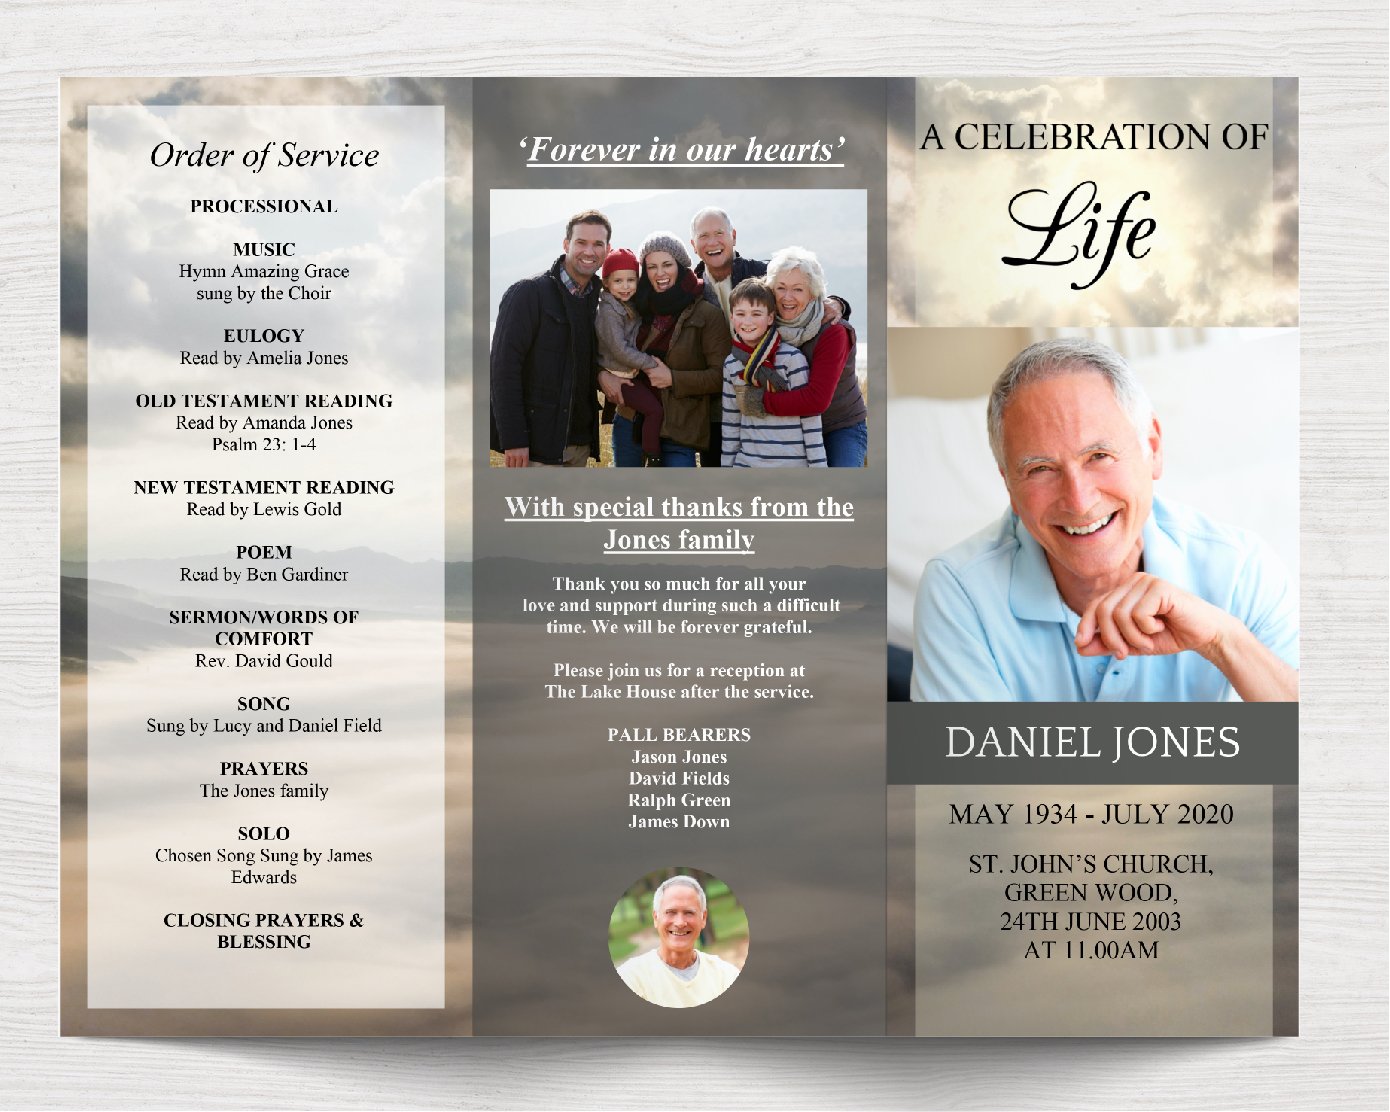 Trifold Mountain Funeral Program Template